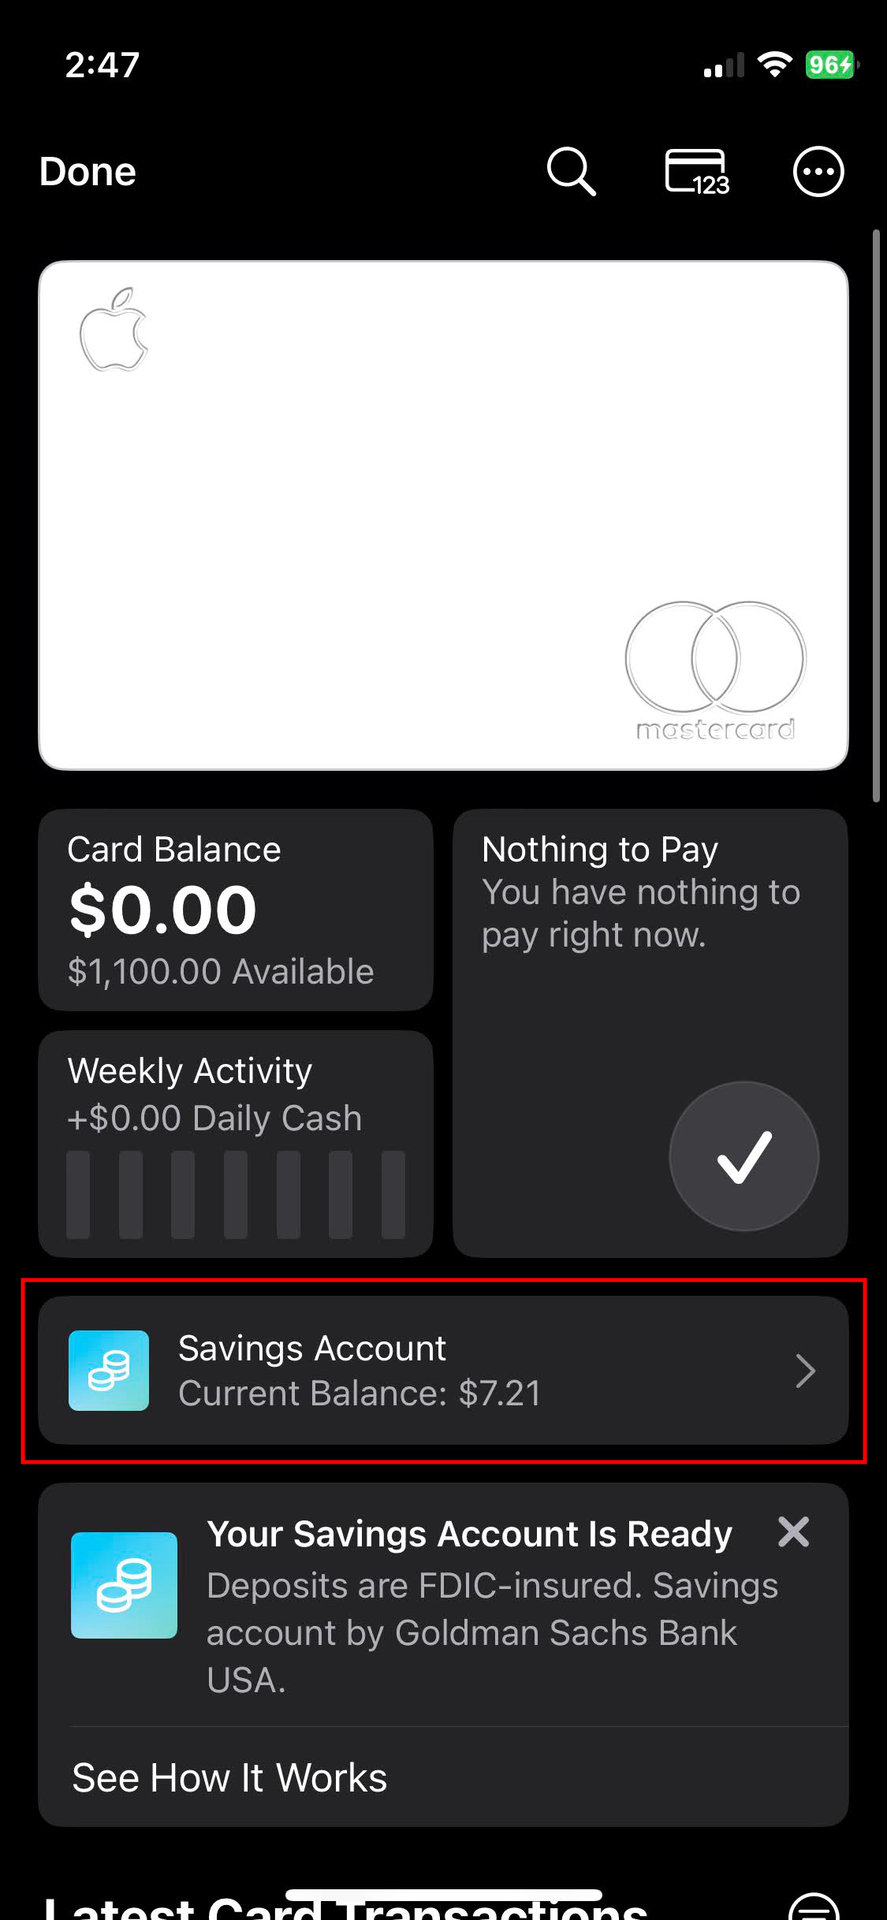 How to withdraw money from your Apple Card Savings account 2